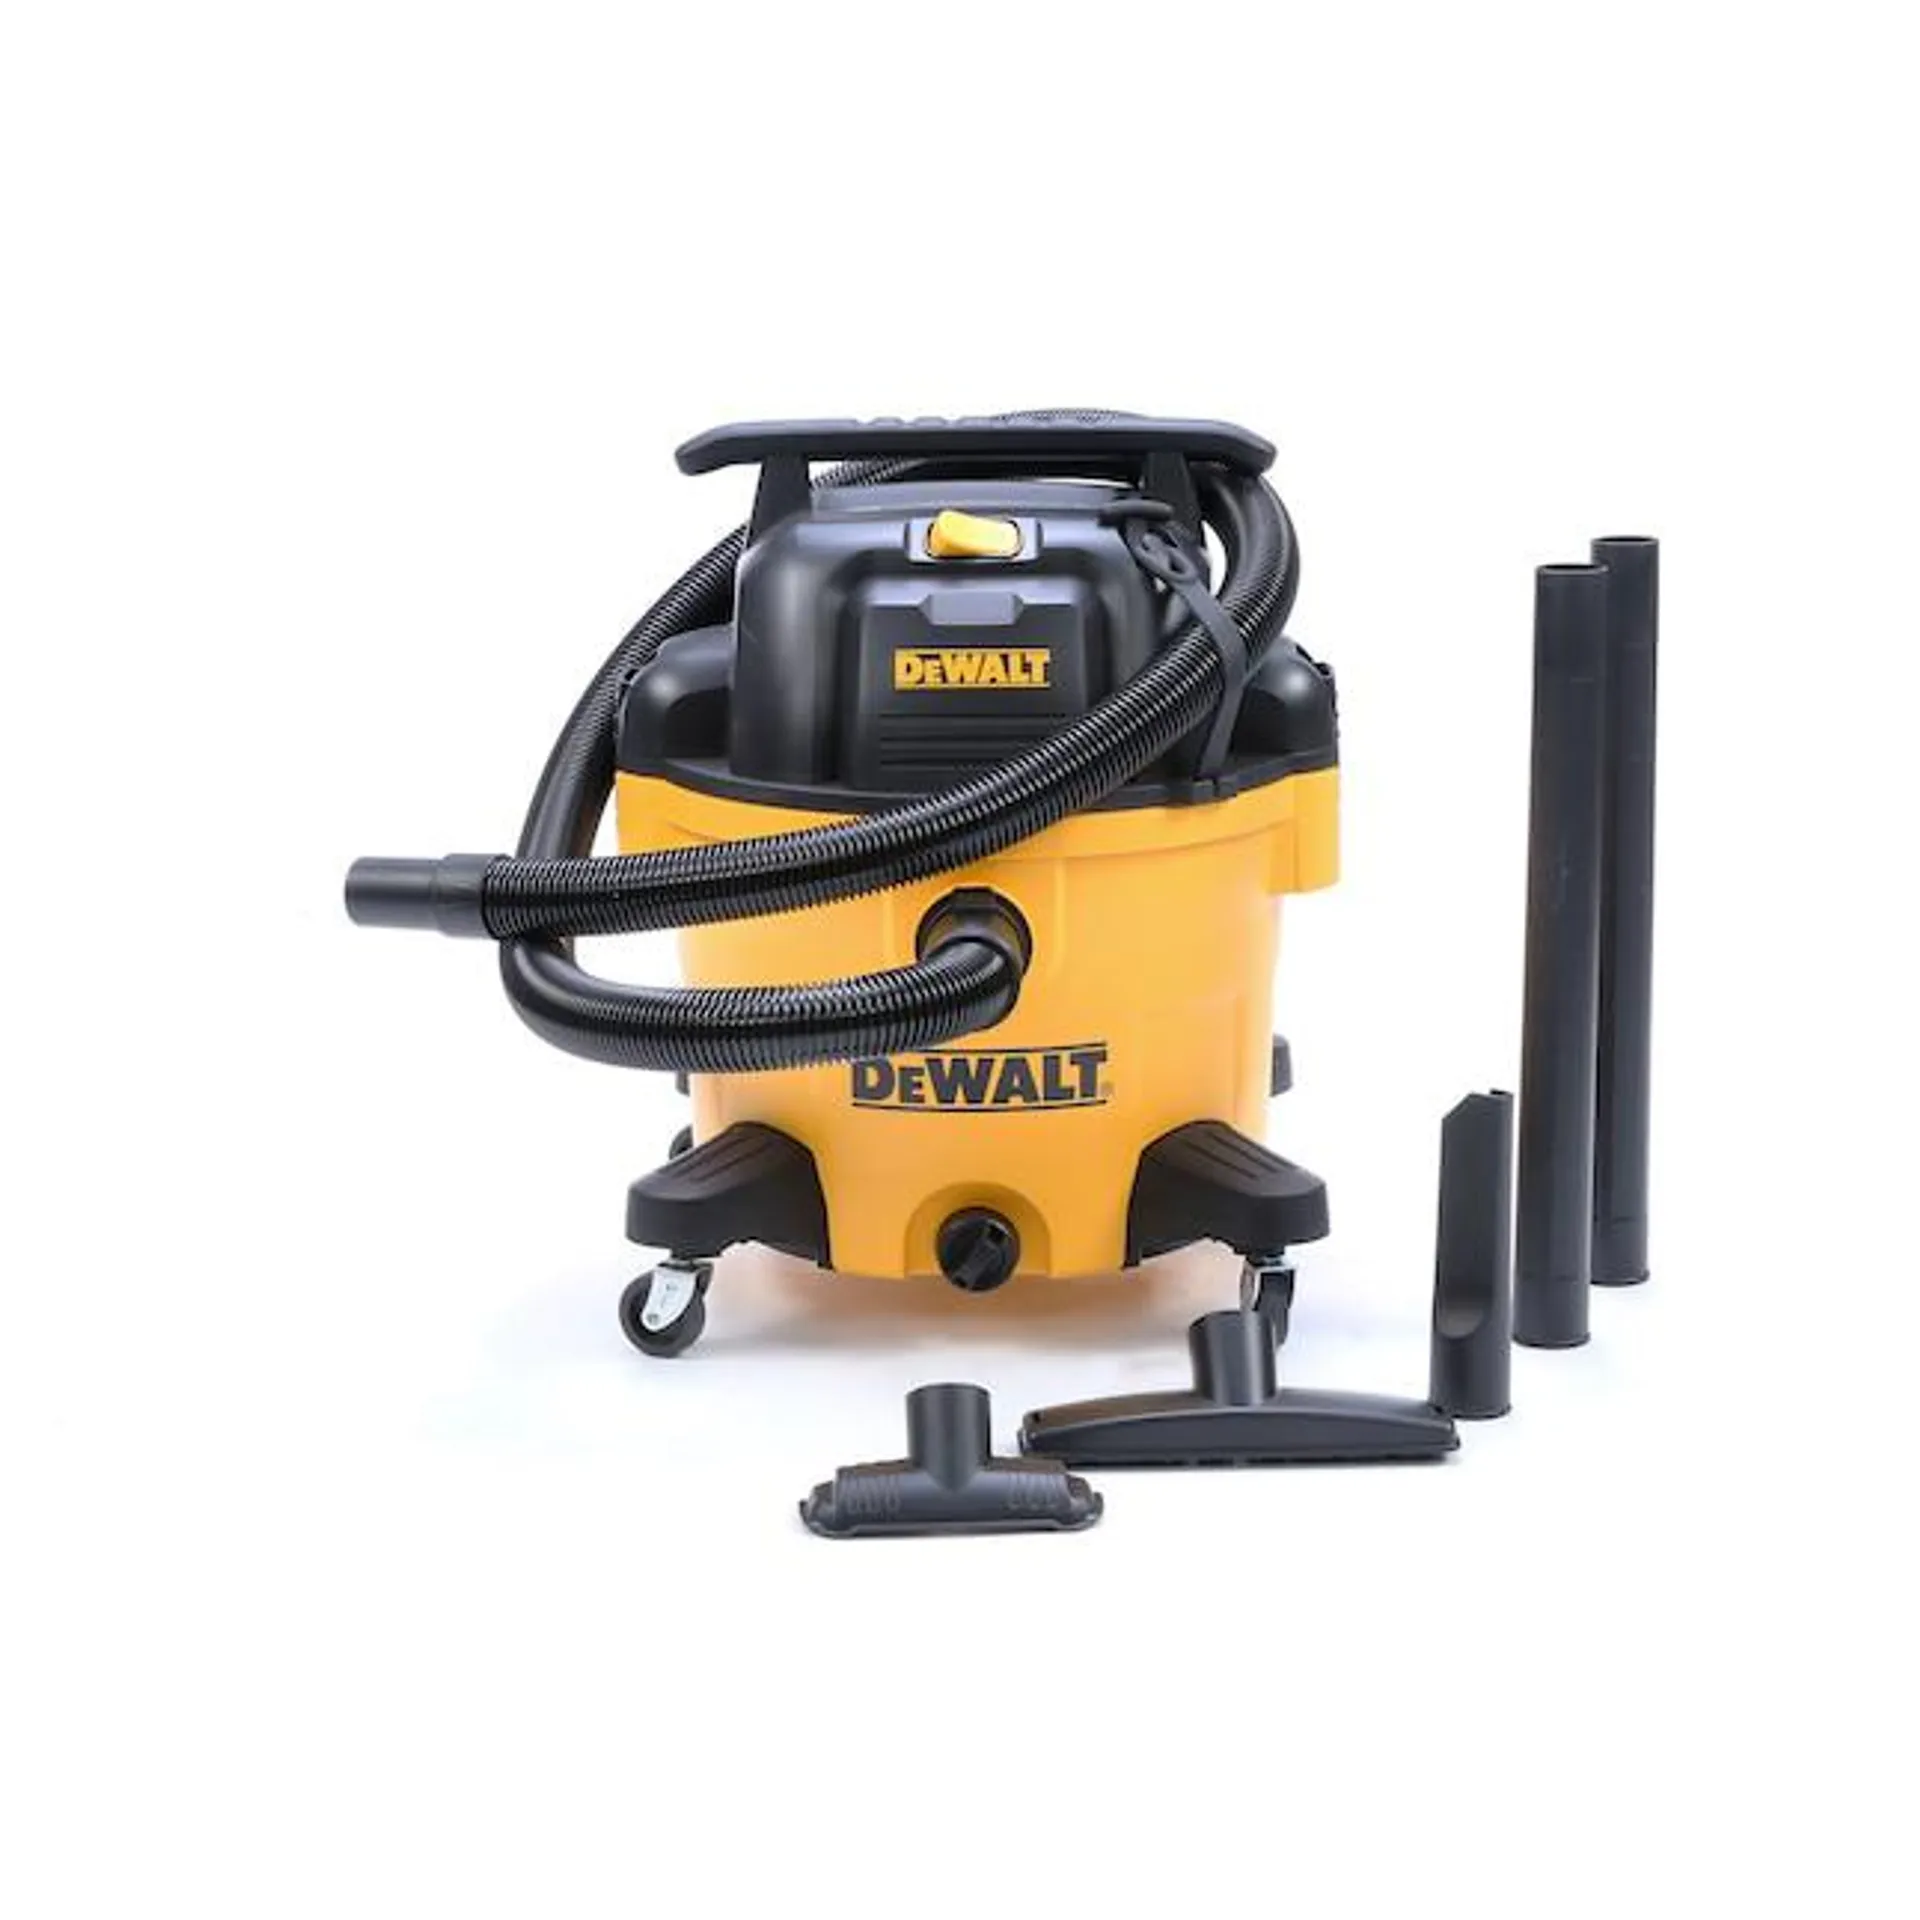 DEWALT 9-Gallons 5-HP Corded Wet/Dry Shop Vacuum with Accessories Included